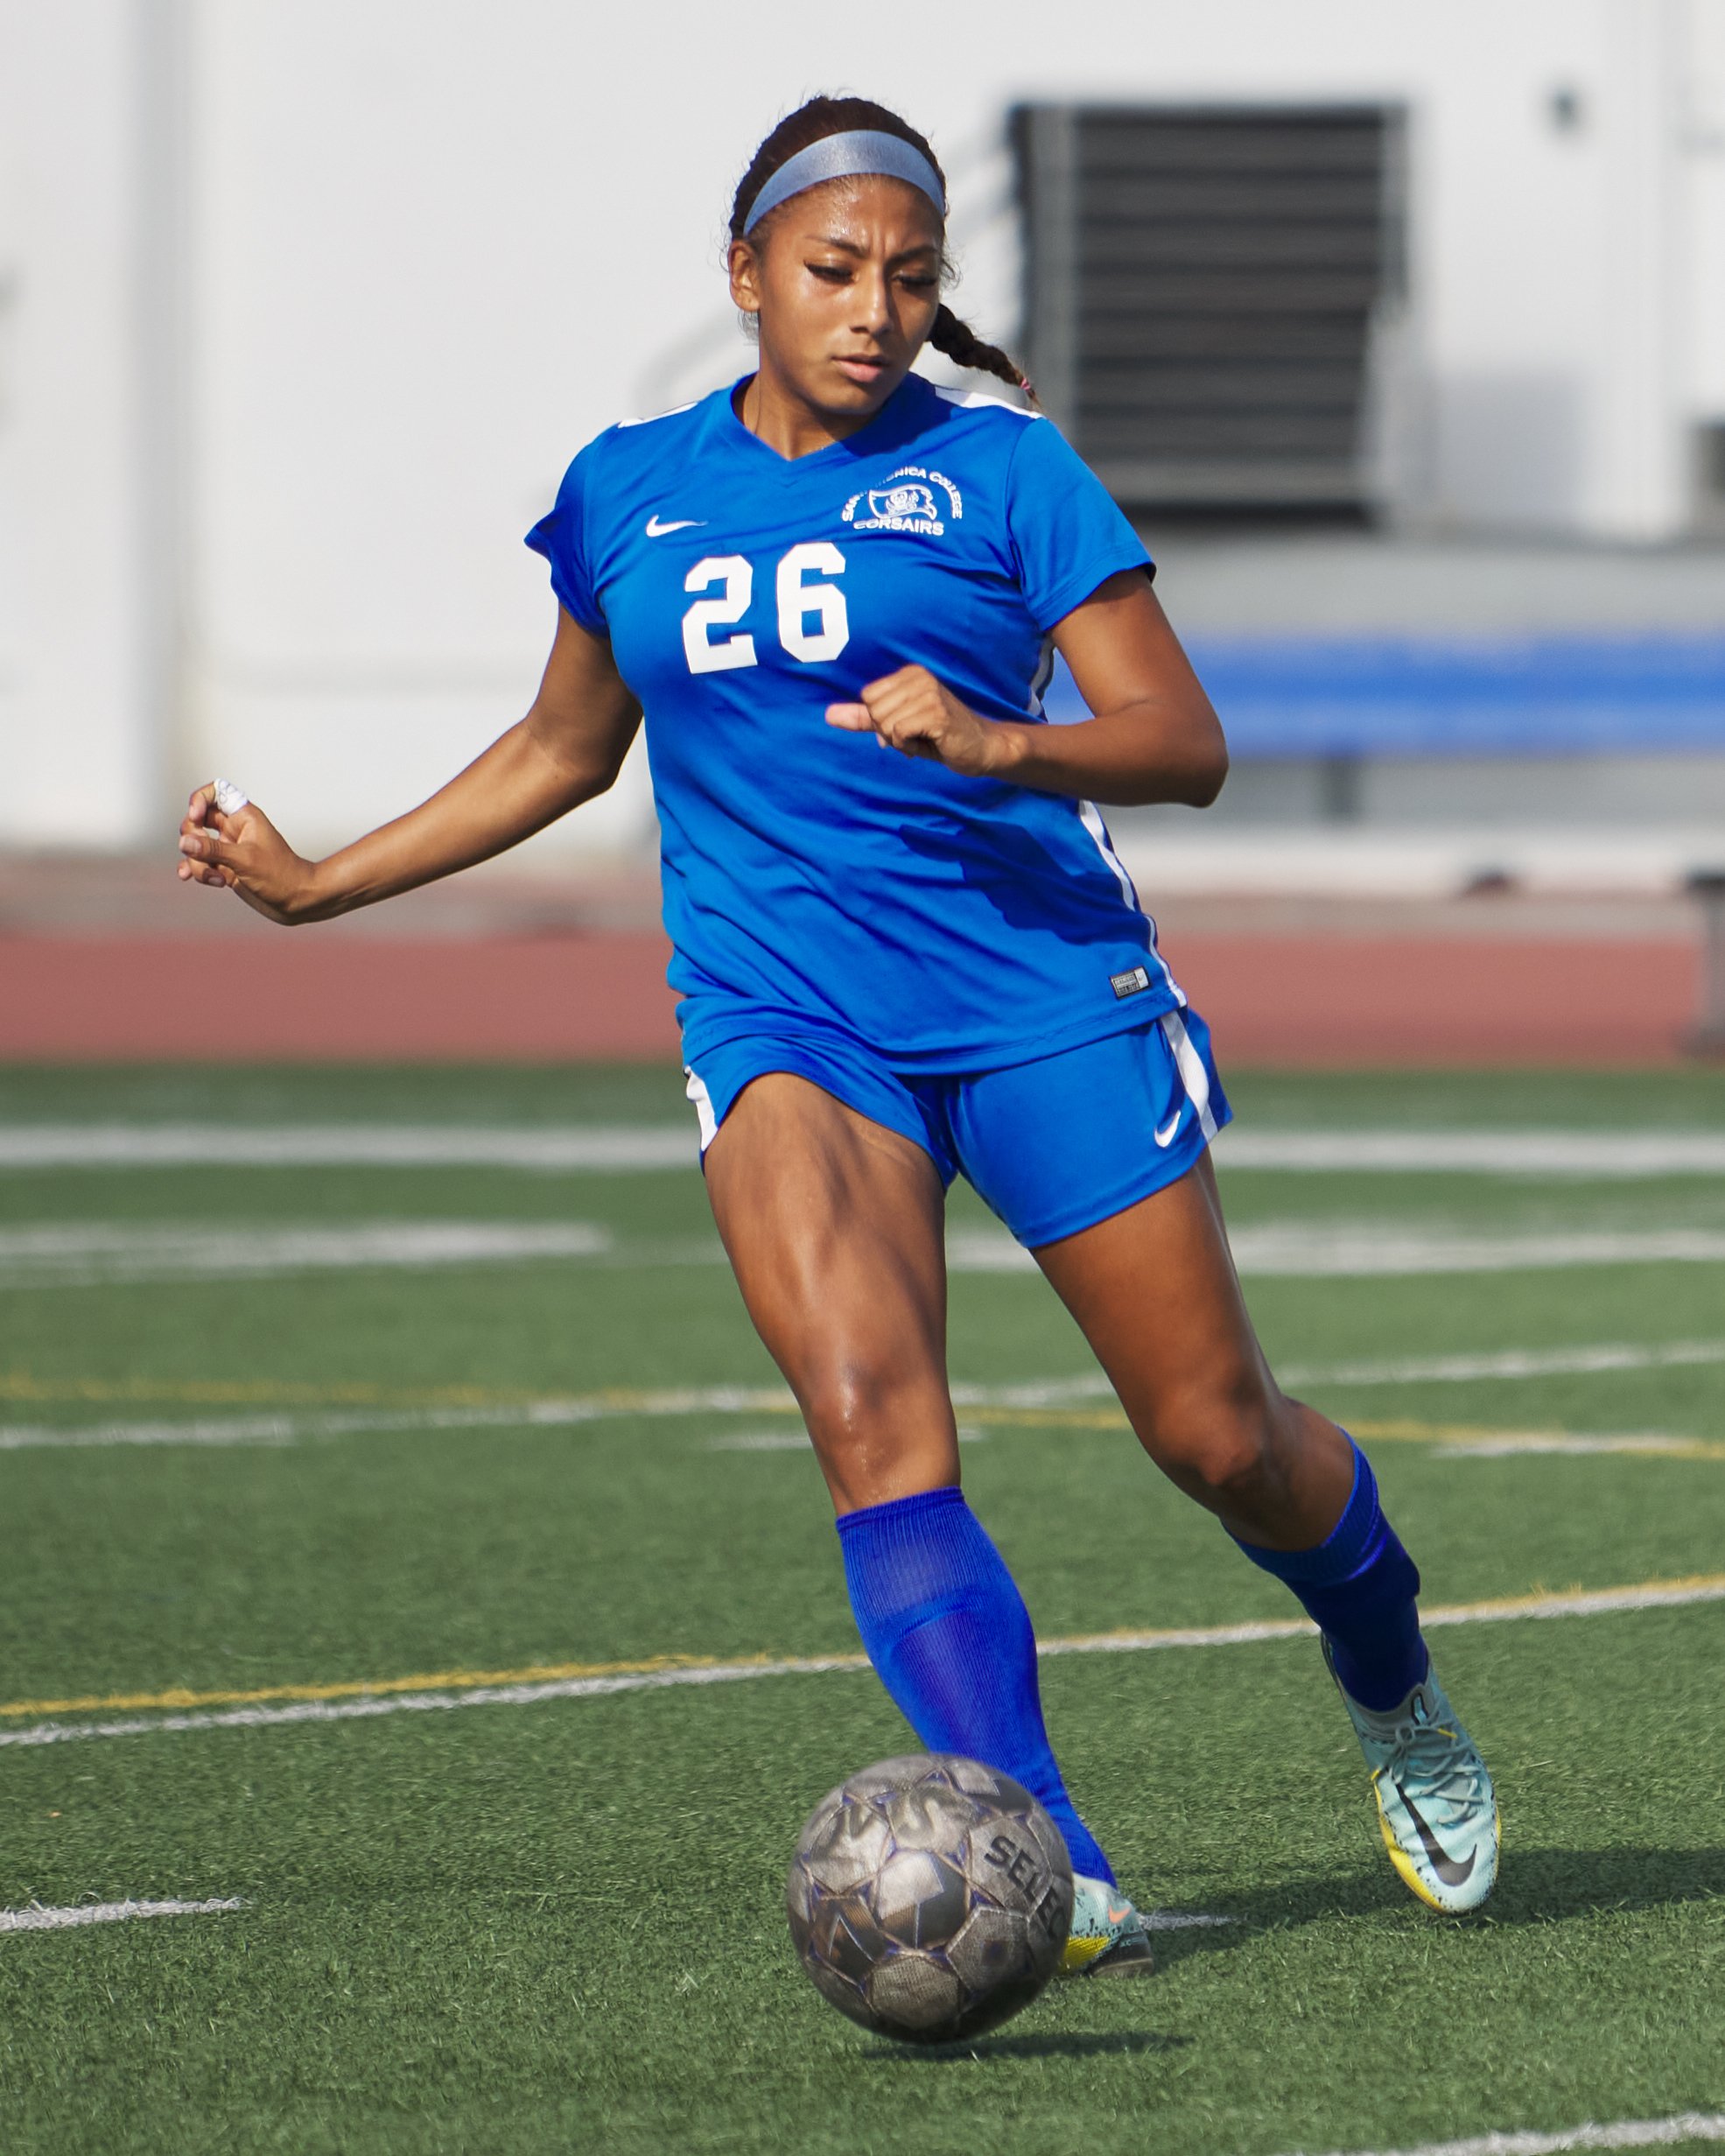  Santa Monica College Corsairs' Diana Gaspar during the women's soccer match against the Glendale Community College Vaqueros on Friday, Oct. 21, 2022, at Corsair Field in Santa Monica, Calif. The Corsairs won 8-0. (Nicholas McCall | The Corsair) 